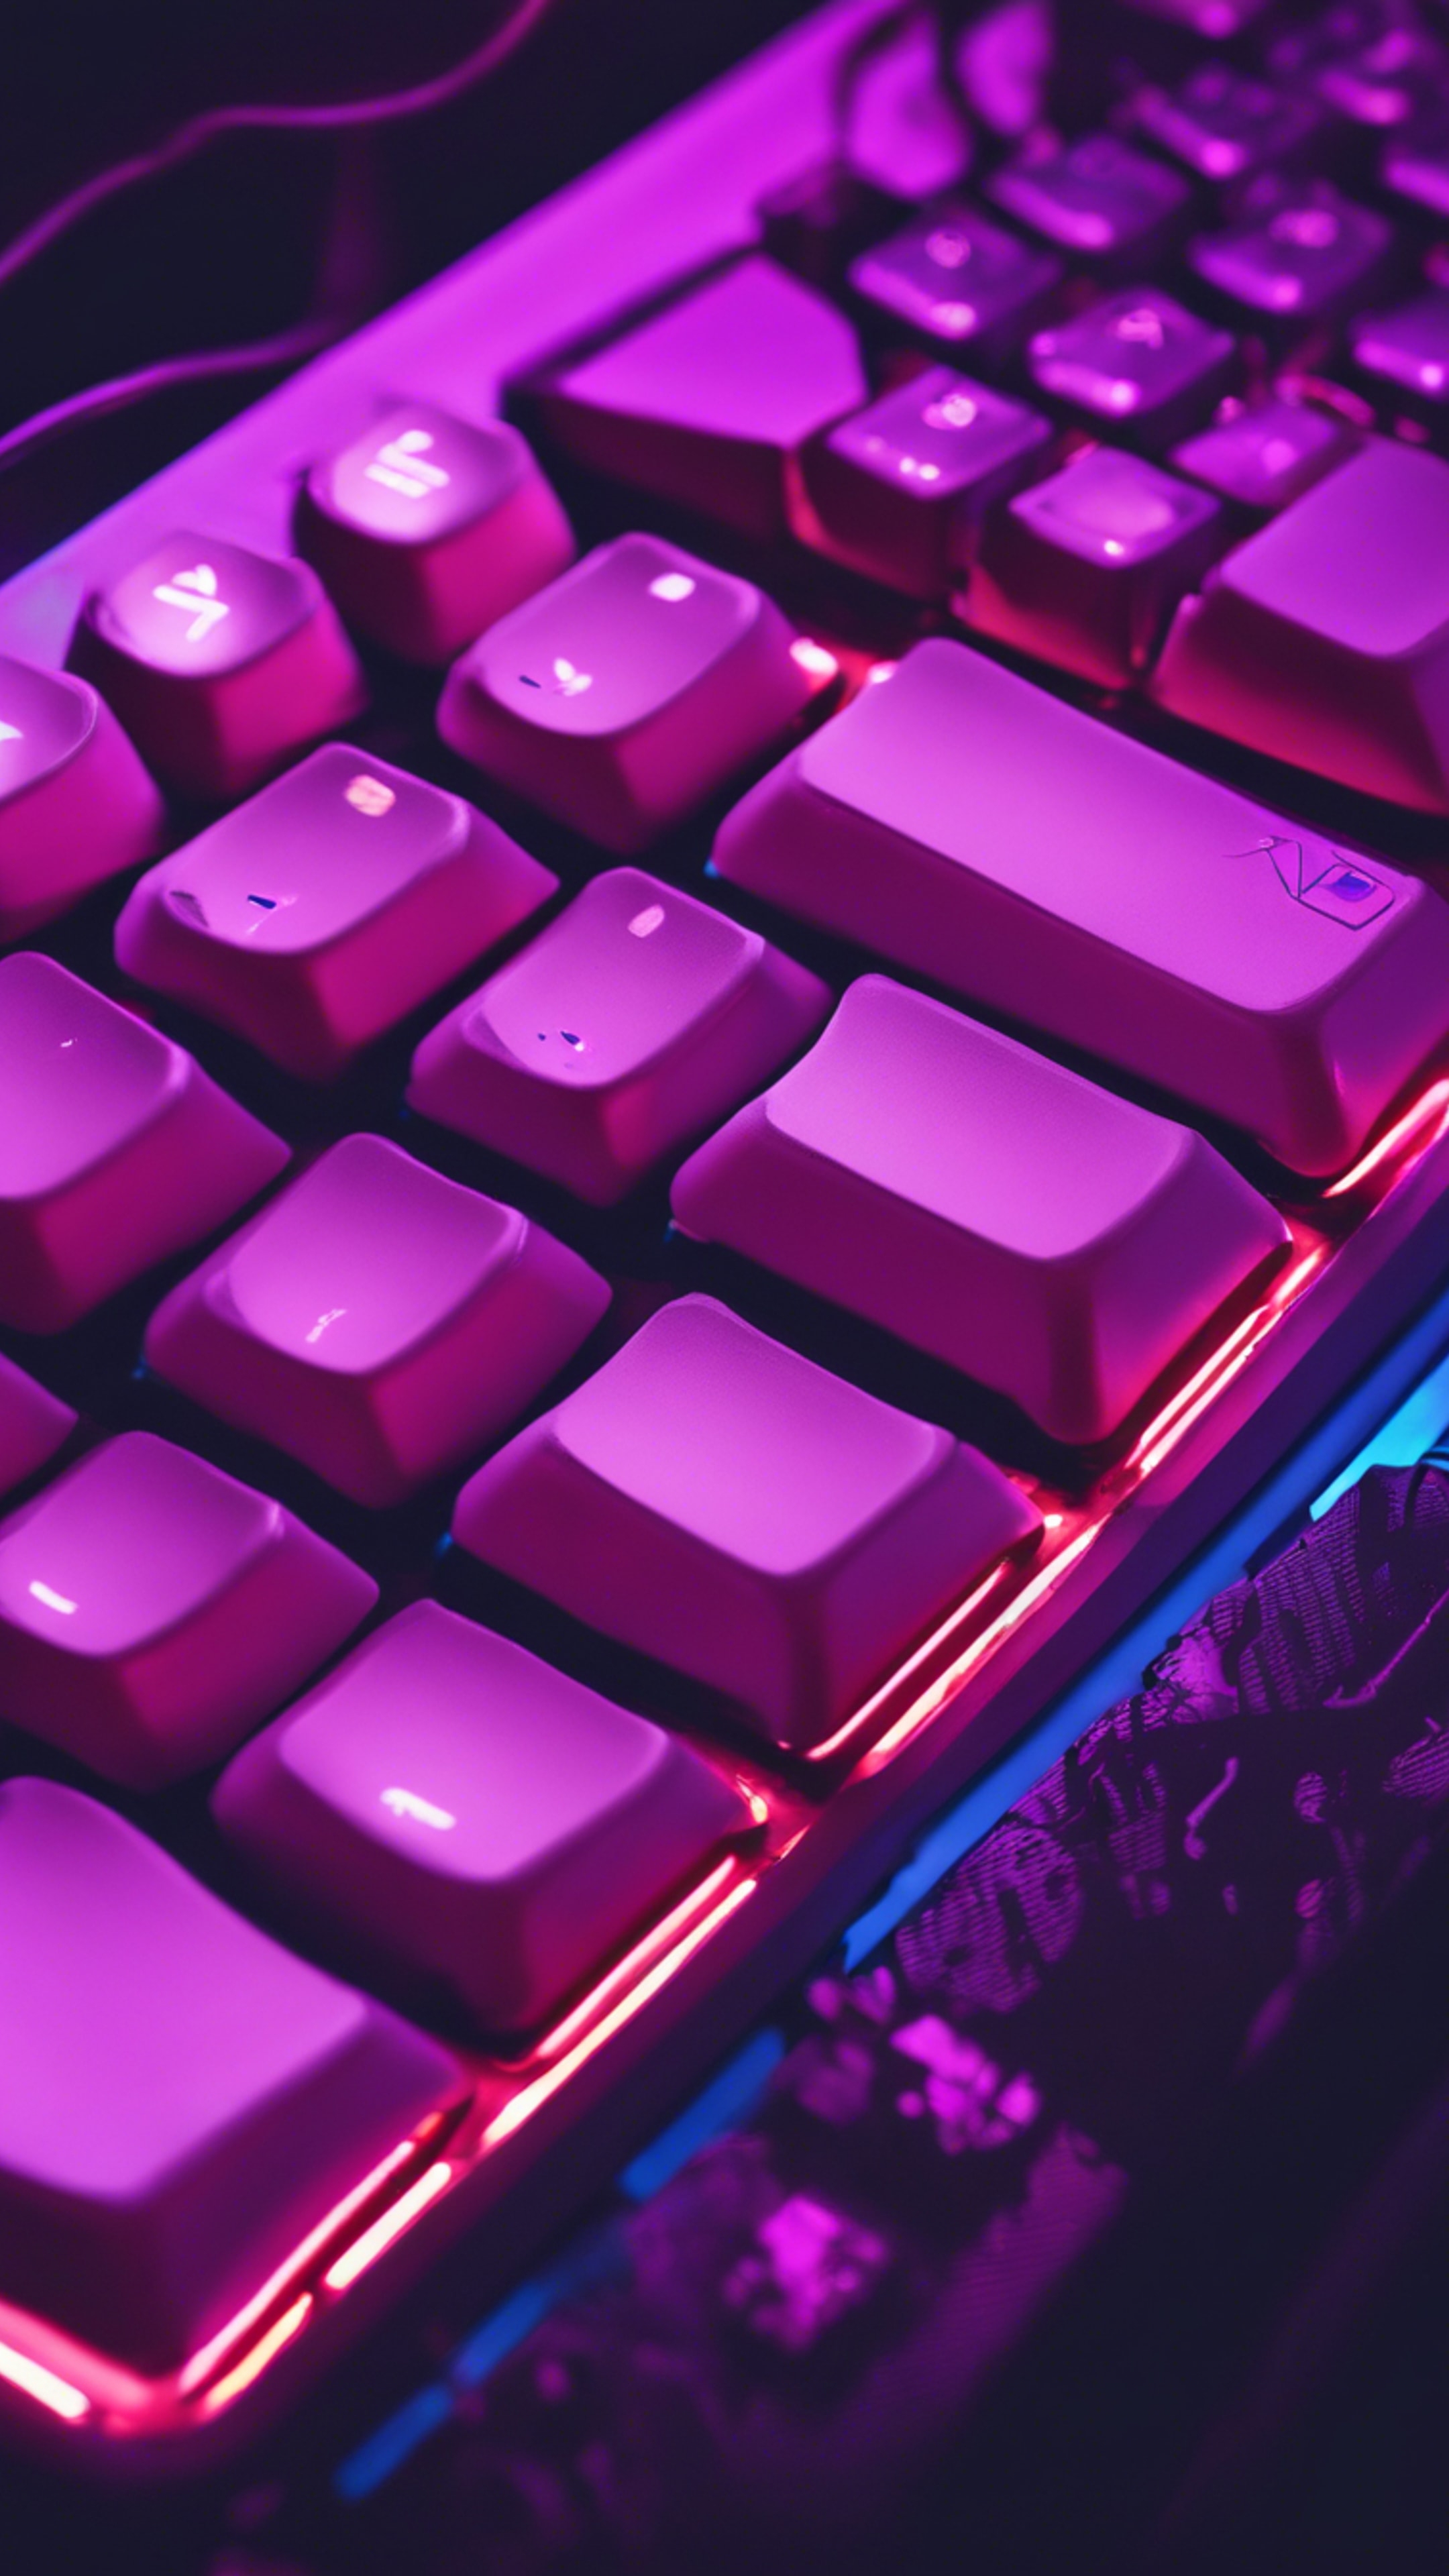 A detailed close-up image of a neon purple backlit gaming keyboard in a dark room. Обои[fb3f2373aec546b8b630]